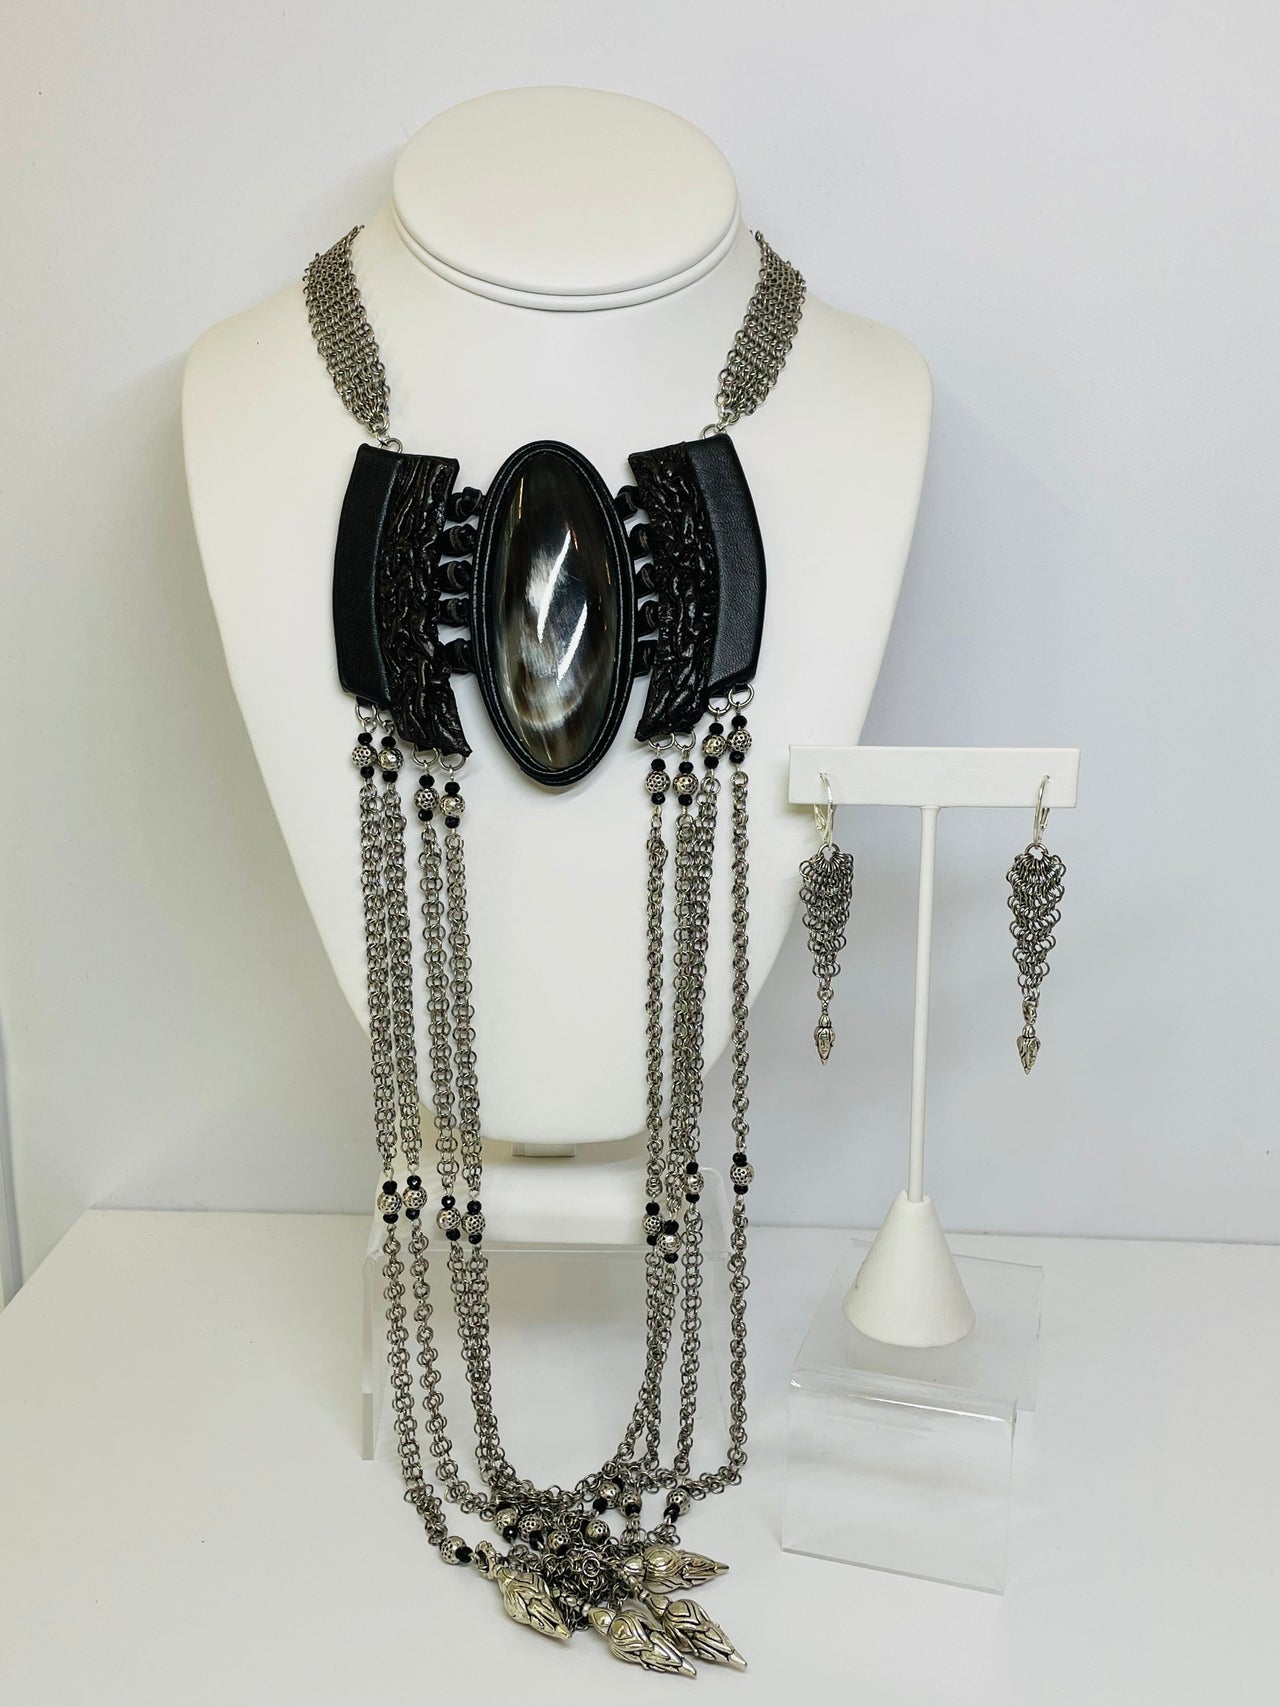 Ferrara Silver Mesh and Leather Bull Horn Necklace and Earrings Devil's Details 